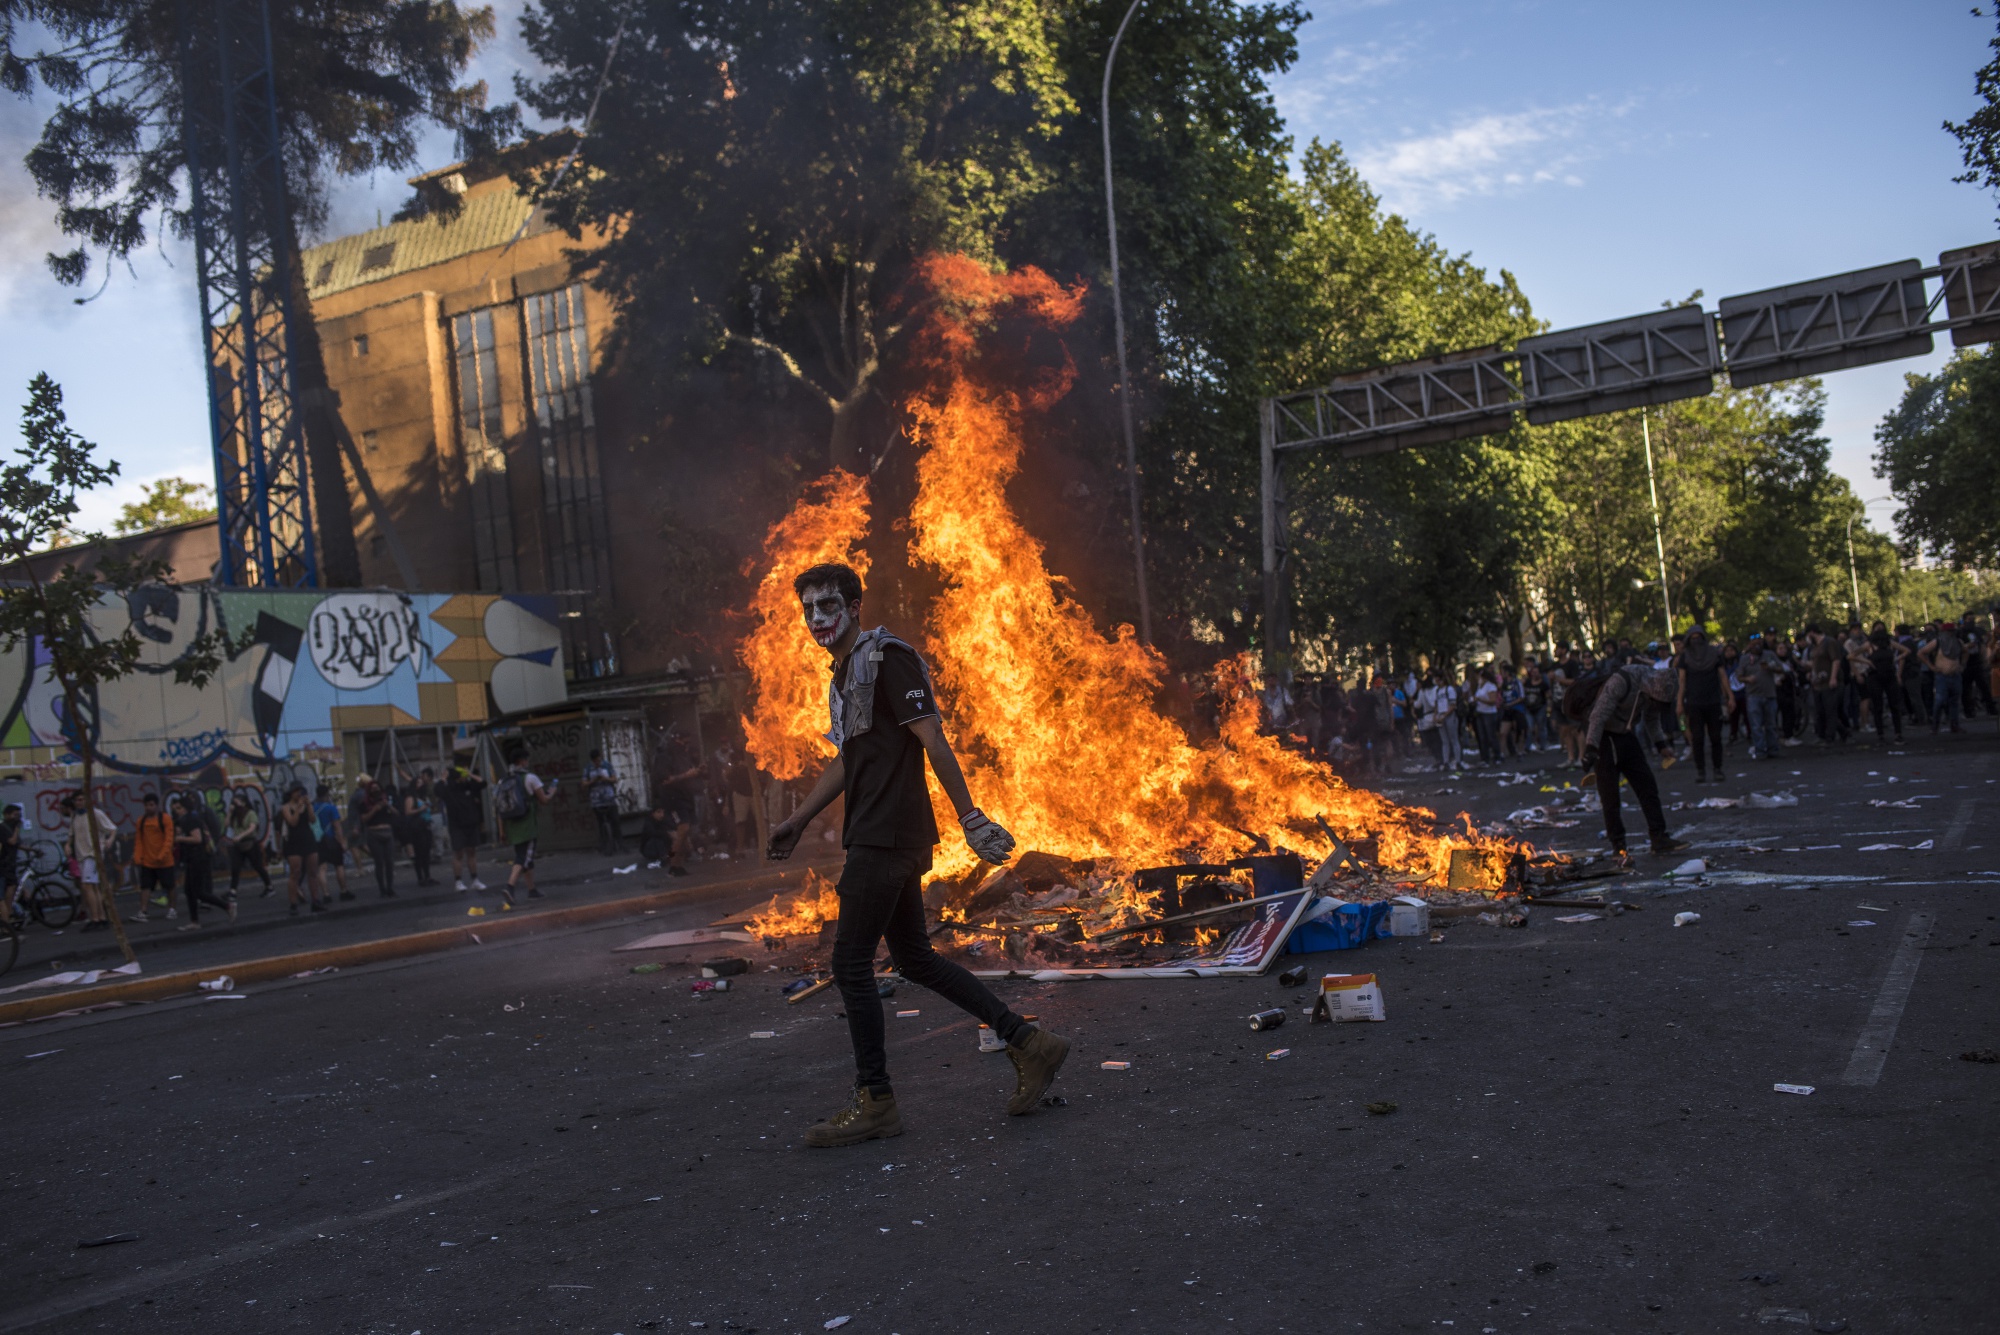 Fire burns on a street during a protest in Santiago, Chile, on&nbsp;Oct. 21, 2019.&nbsp;